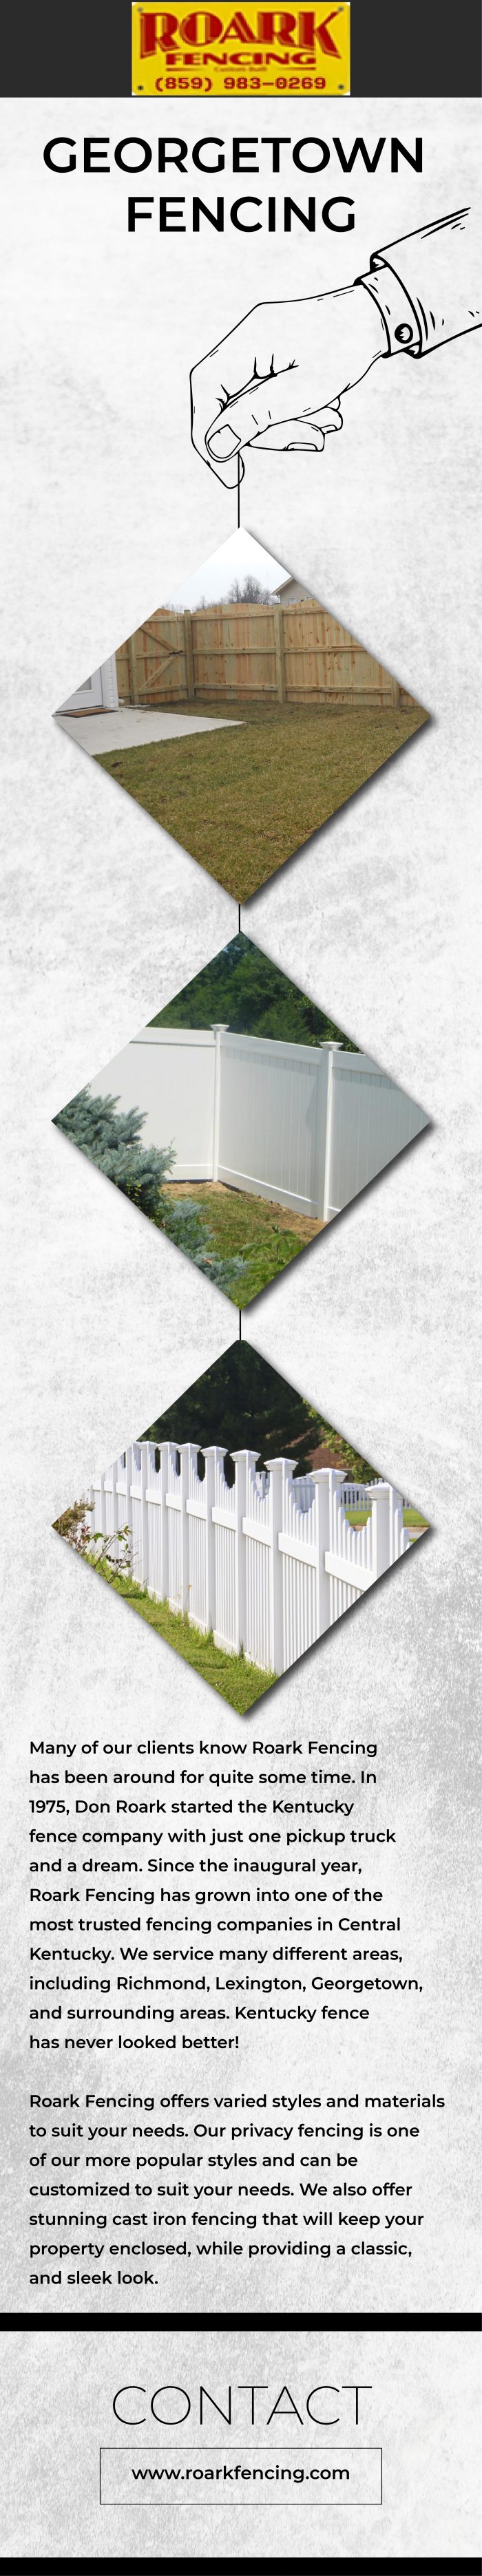 Get Connected with the Best Georgetown Fencing Company at Roark Fencing